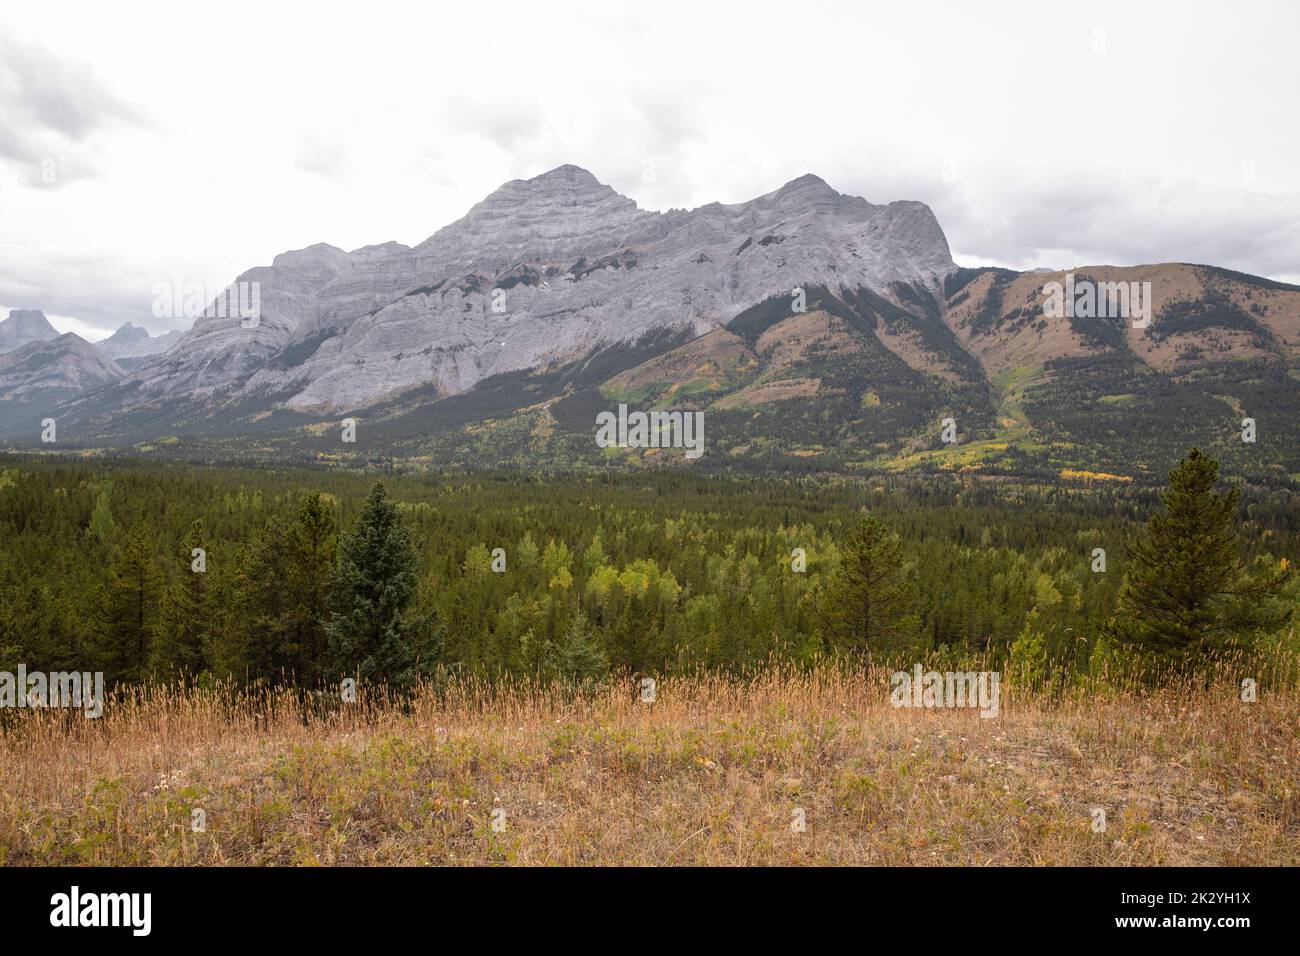 Scenic majestic mountain and tree view, Canadian Rockies, Canada Stock Photo